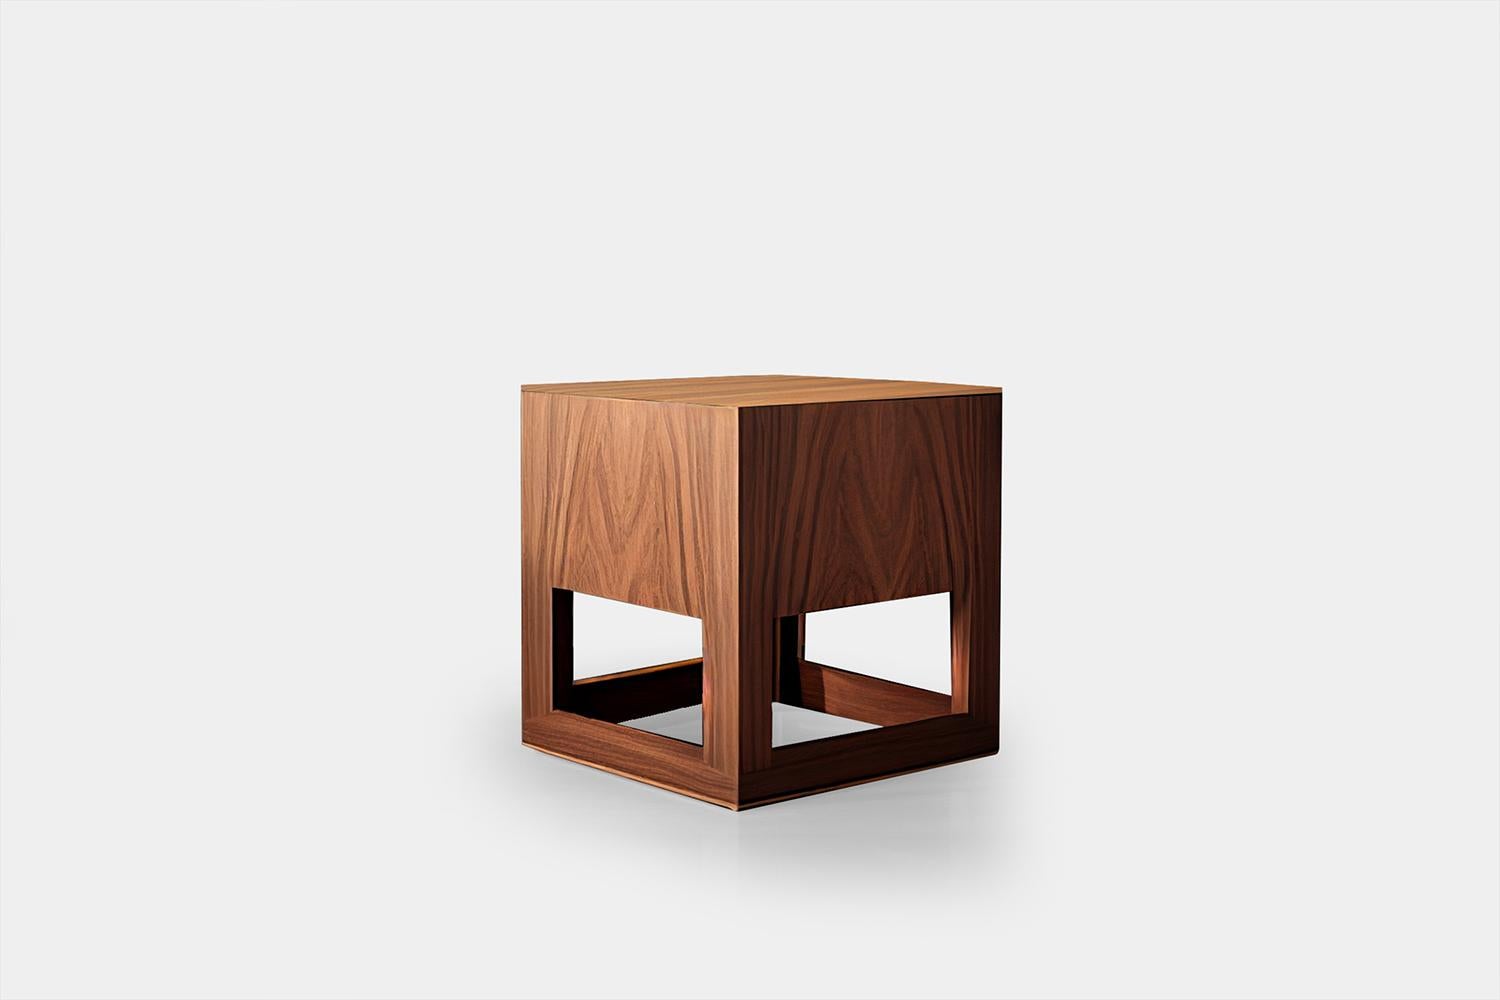 Mexican Minimalist Square Side Table In Walnut Veneer, Nightstand by Joel Escalona  For Sale